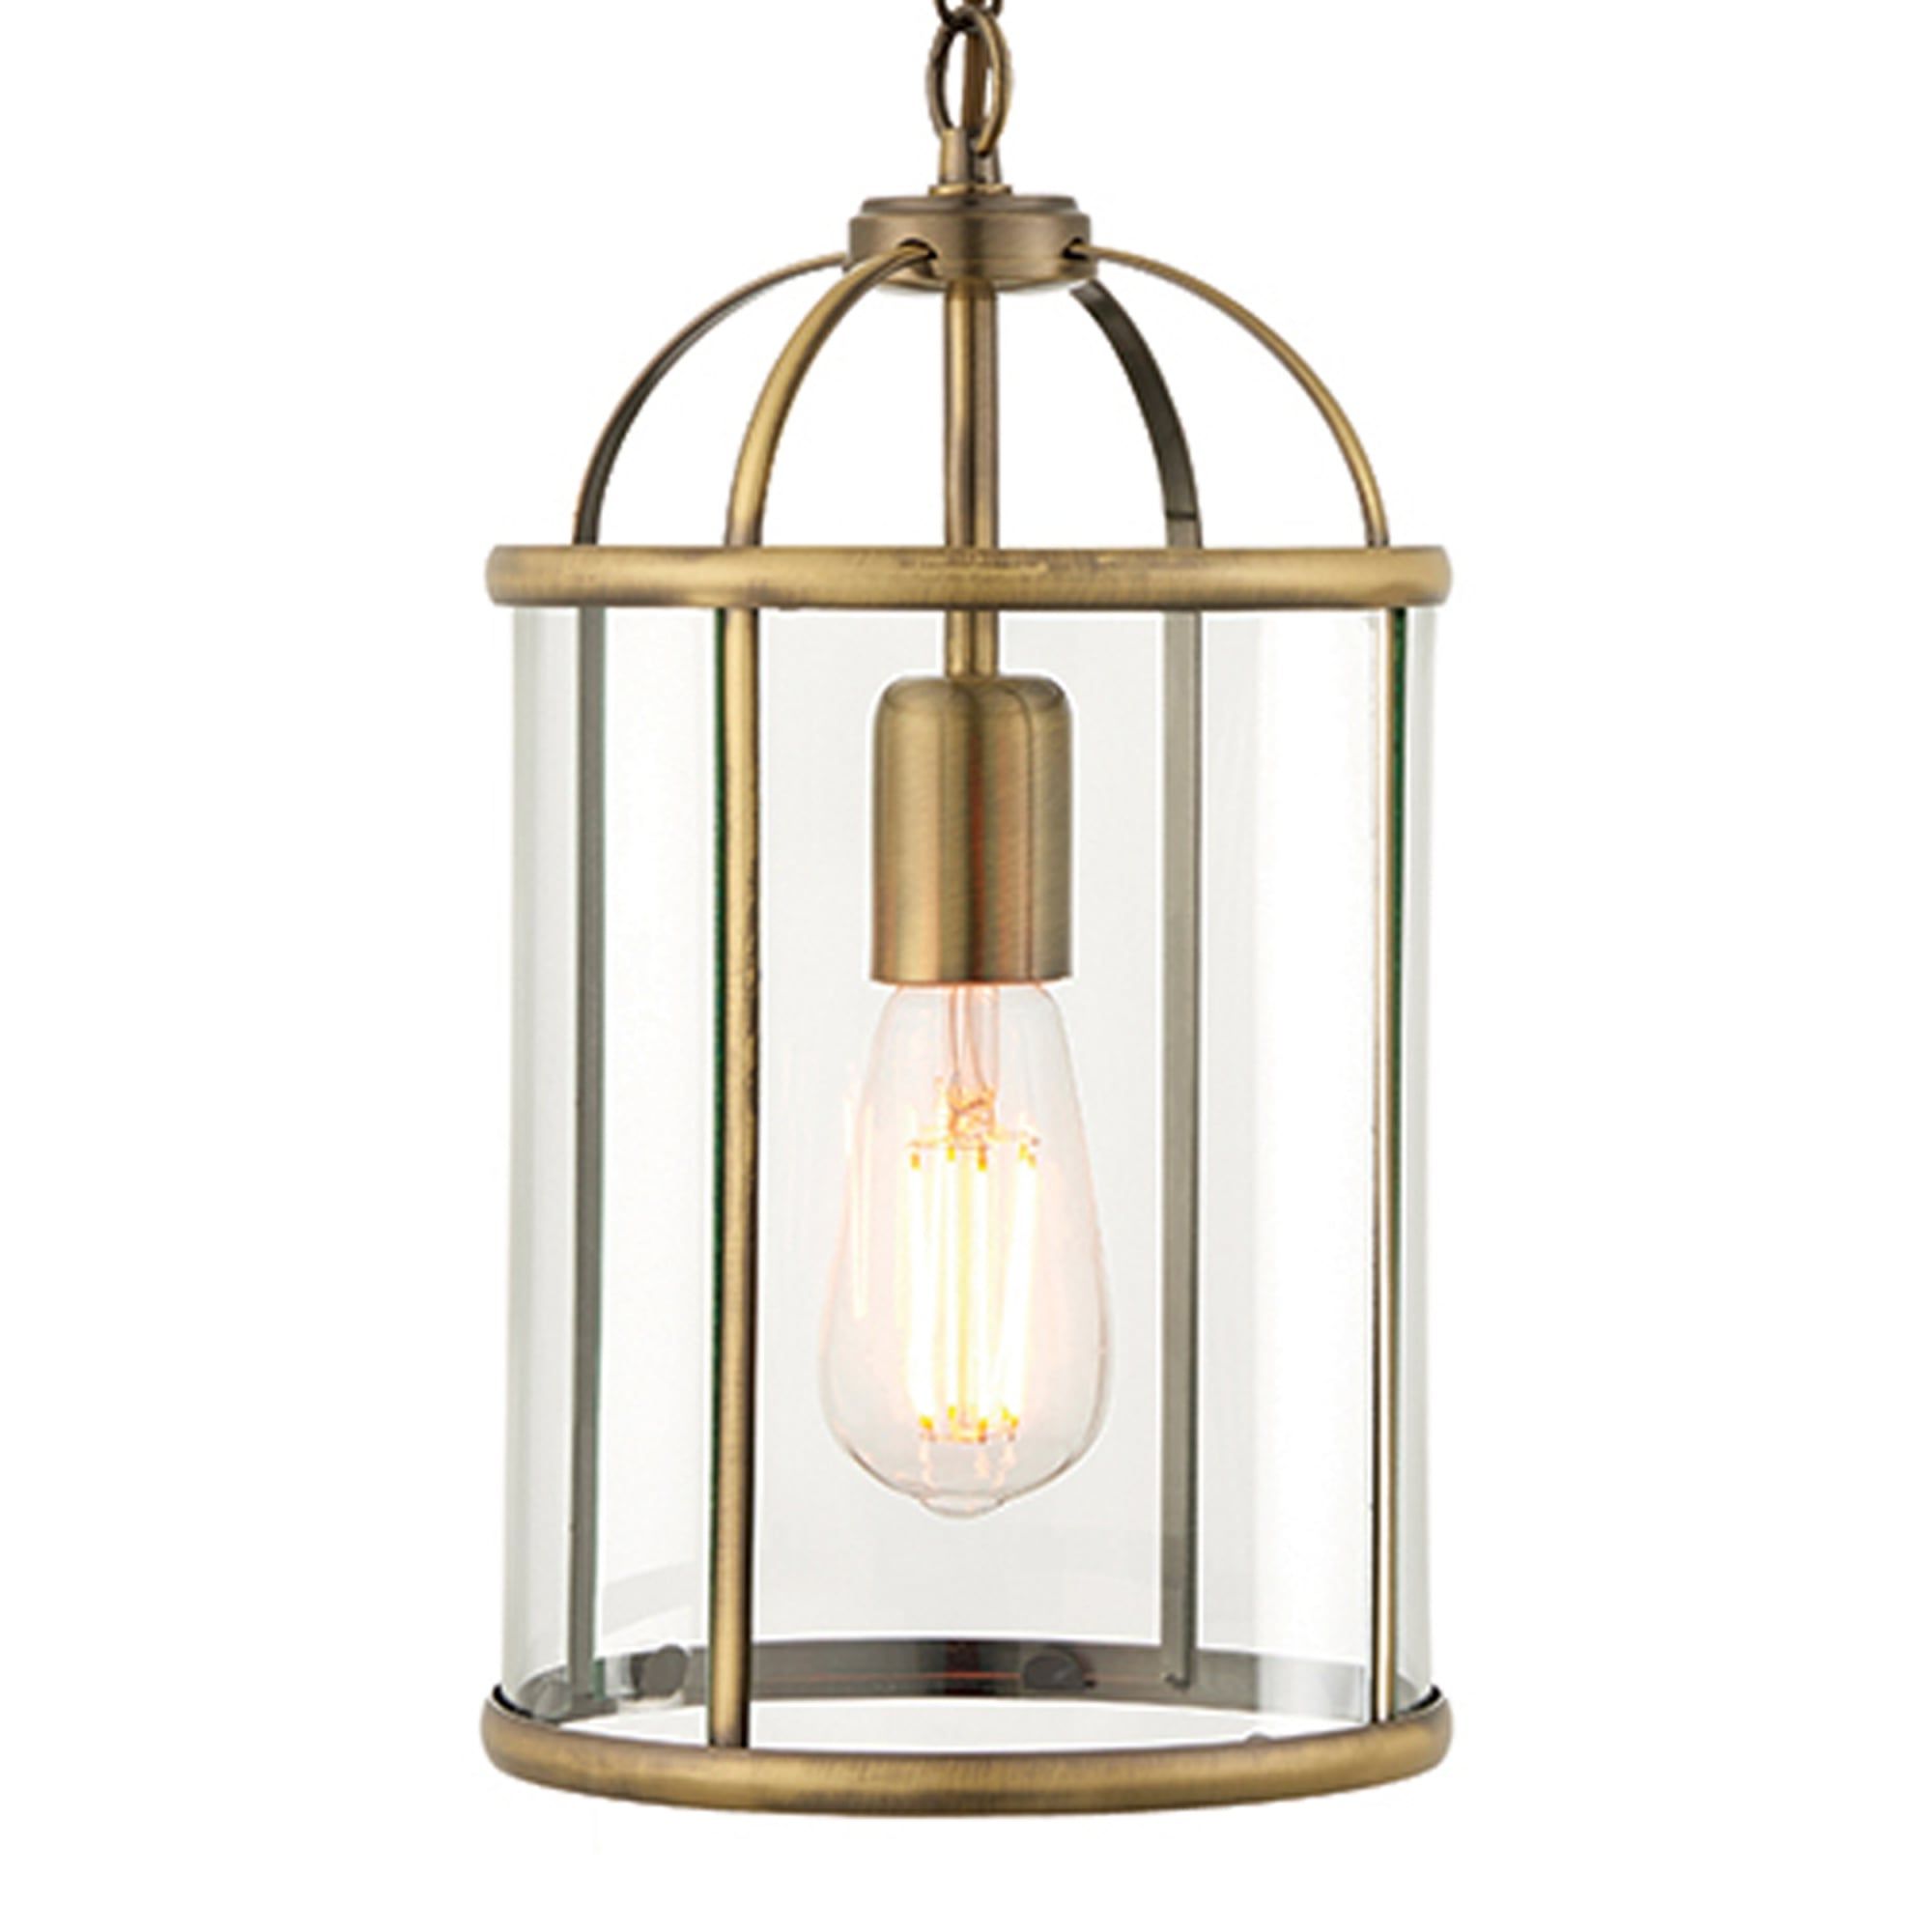 Most Recently Released Endon 69454 Lambeth 1 Light Antique Brass And Glass Lantern Pendant With Aged Brass Lantern Chandeliers (View 7 of 15)